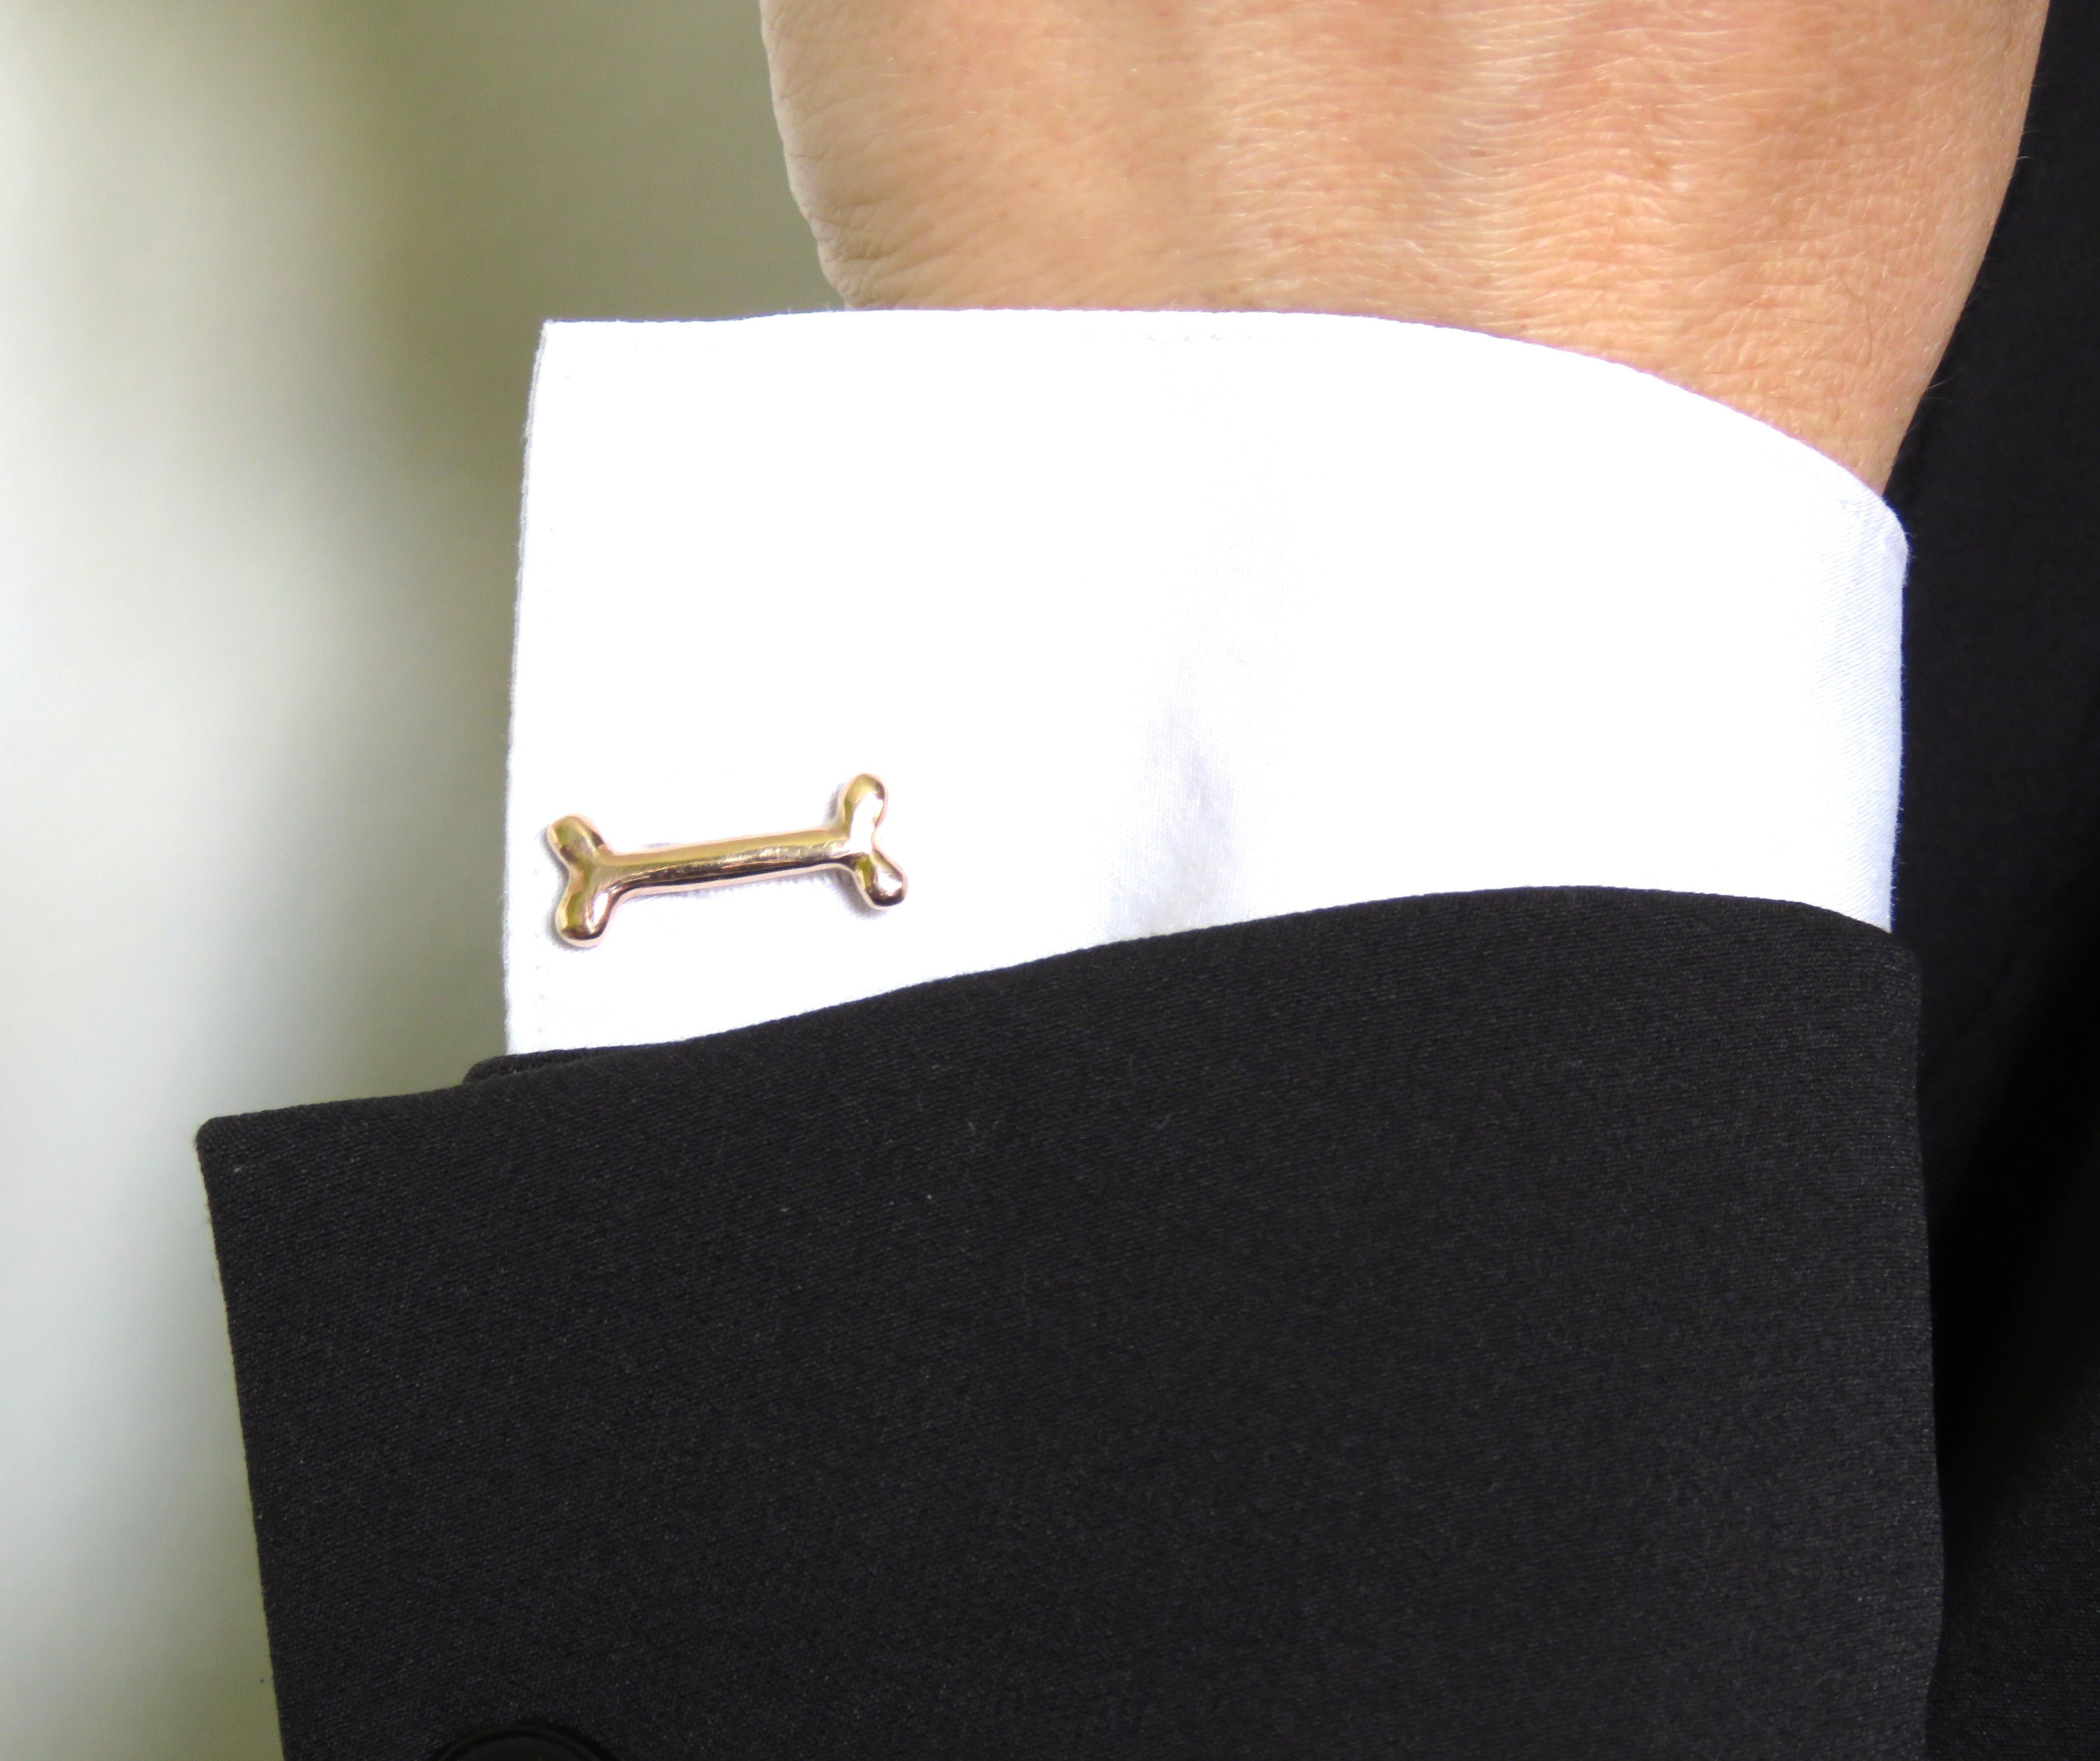 Cufflinks in 9k rose gold with two dog bone bars. Bar length is 20 millimeters / 0,78 inches.
They are stamped with the Italian Gold Mark 375 - 716MI and handcrafted in Italy by Botta Gioielli.
Ready for delivery. It can be shipped with express